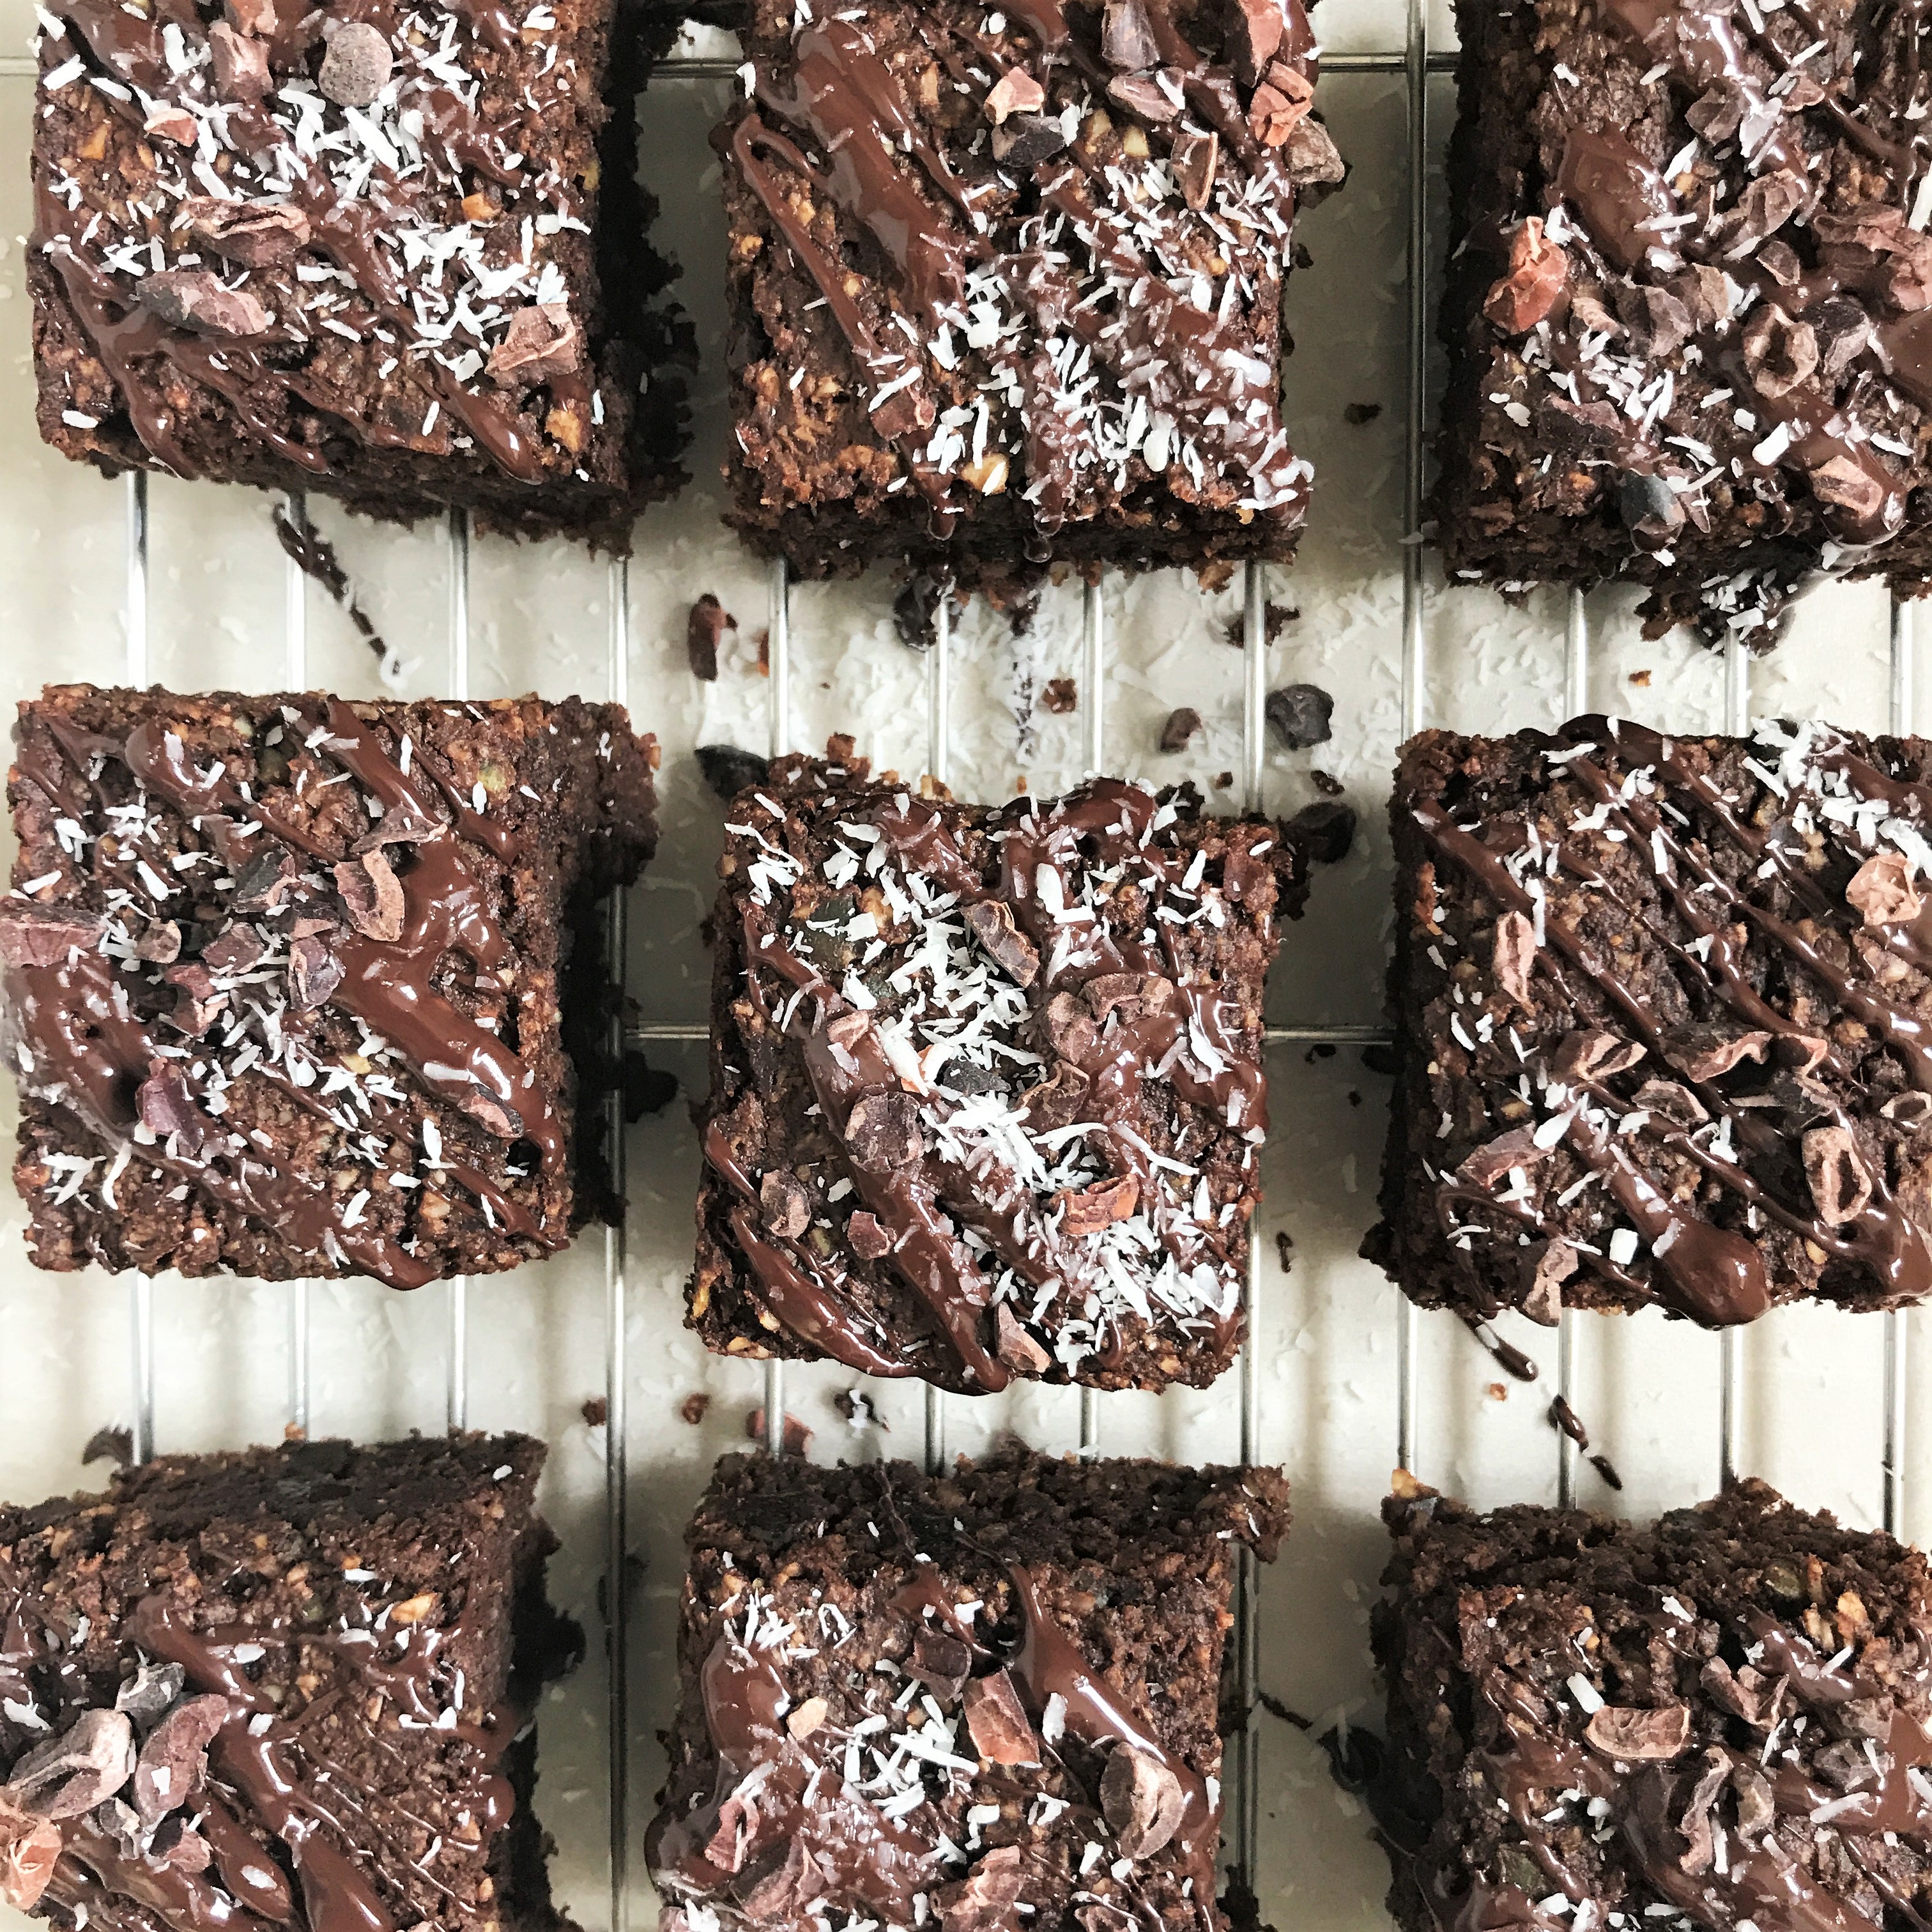 Date and Oat Coconut Brownies